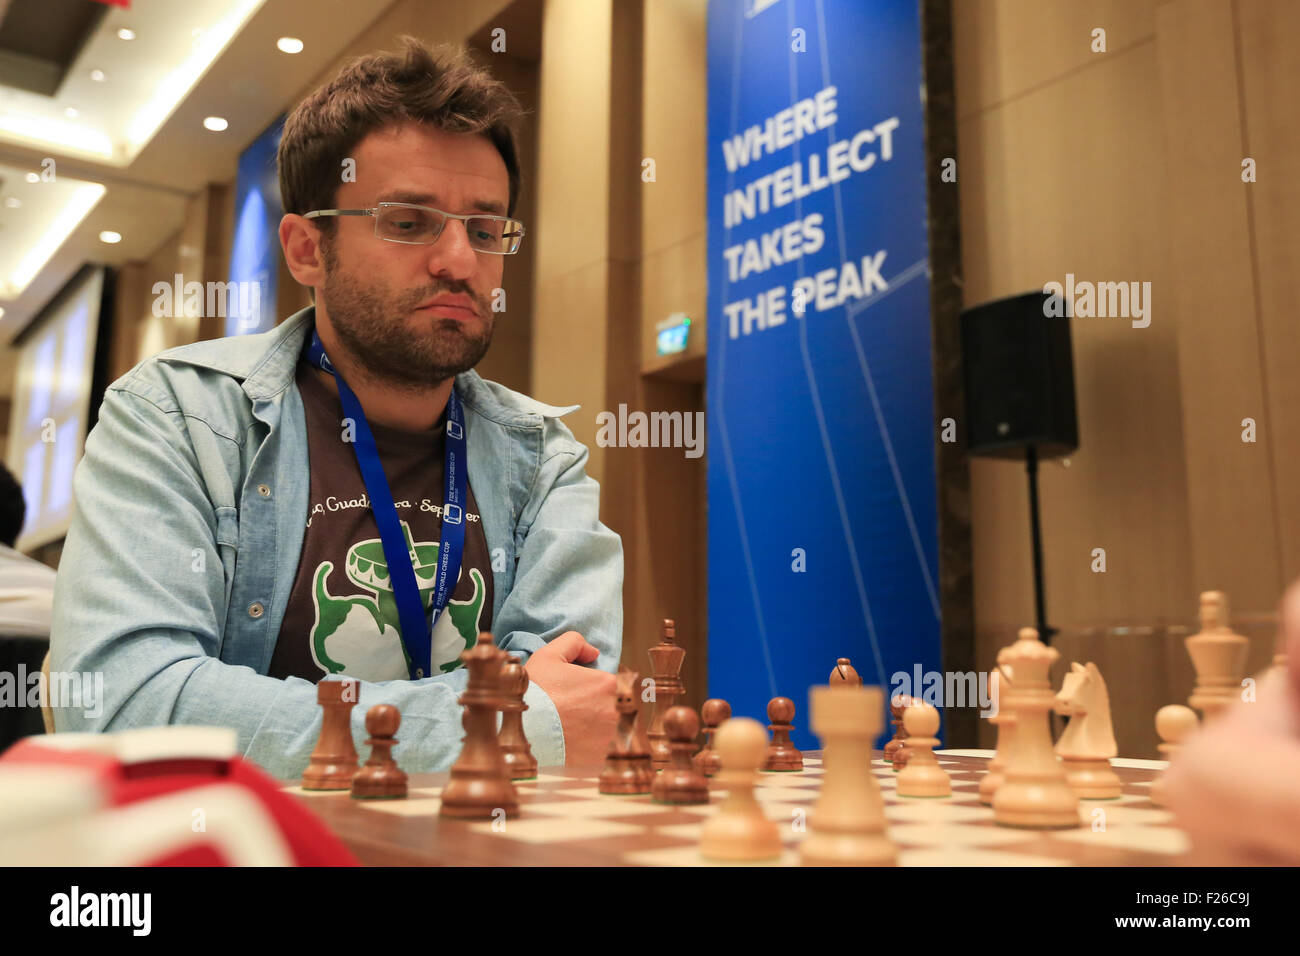 Levon Aronian Faces Ding Liren in World Cup Final